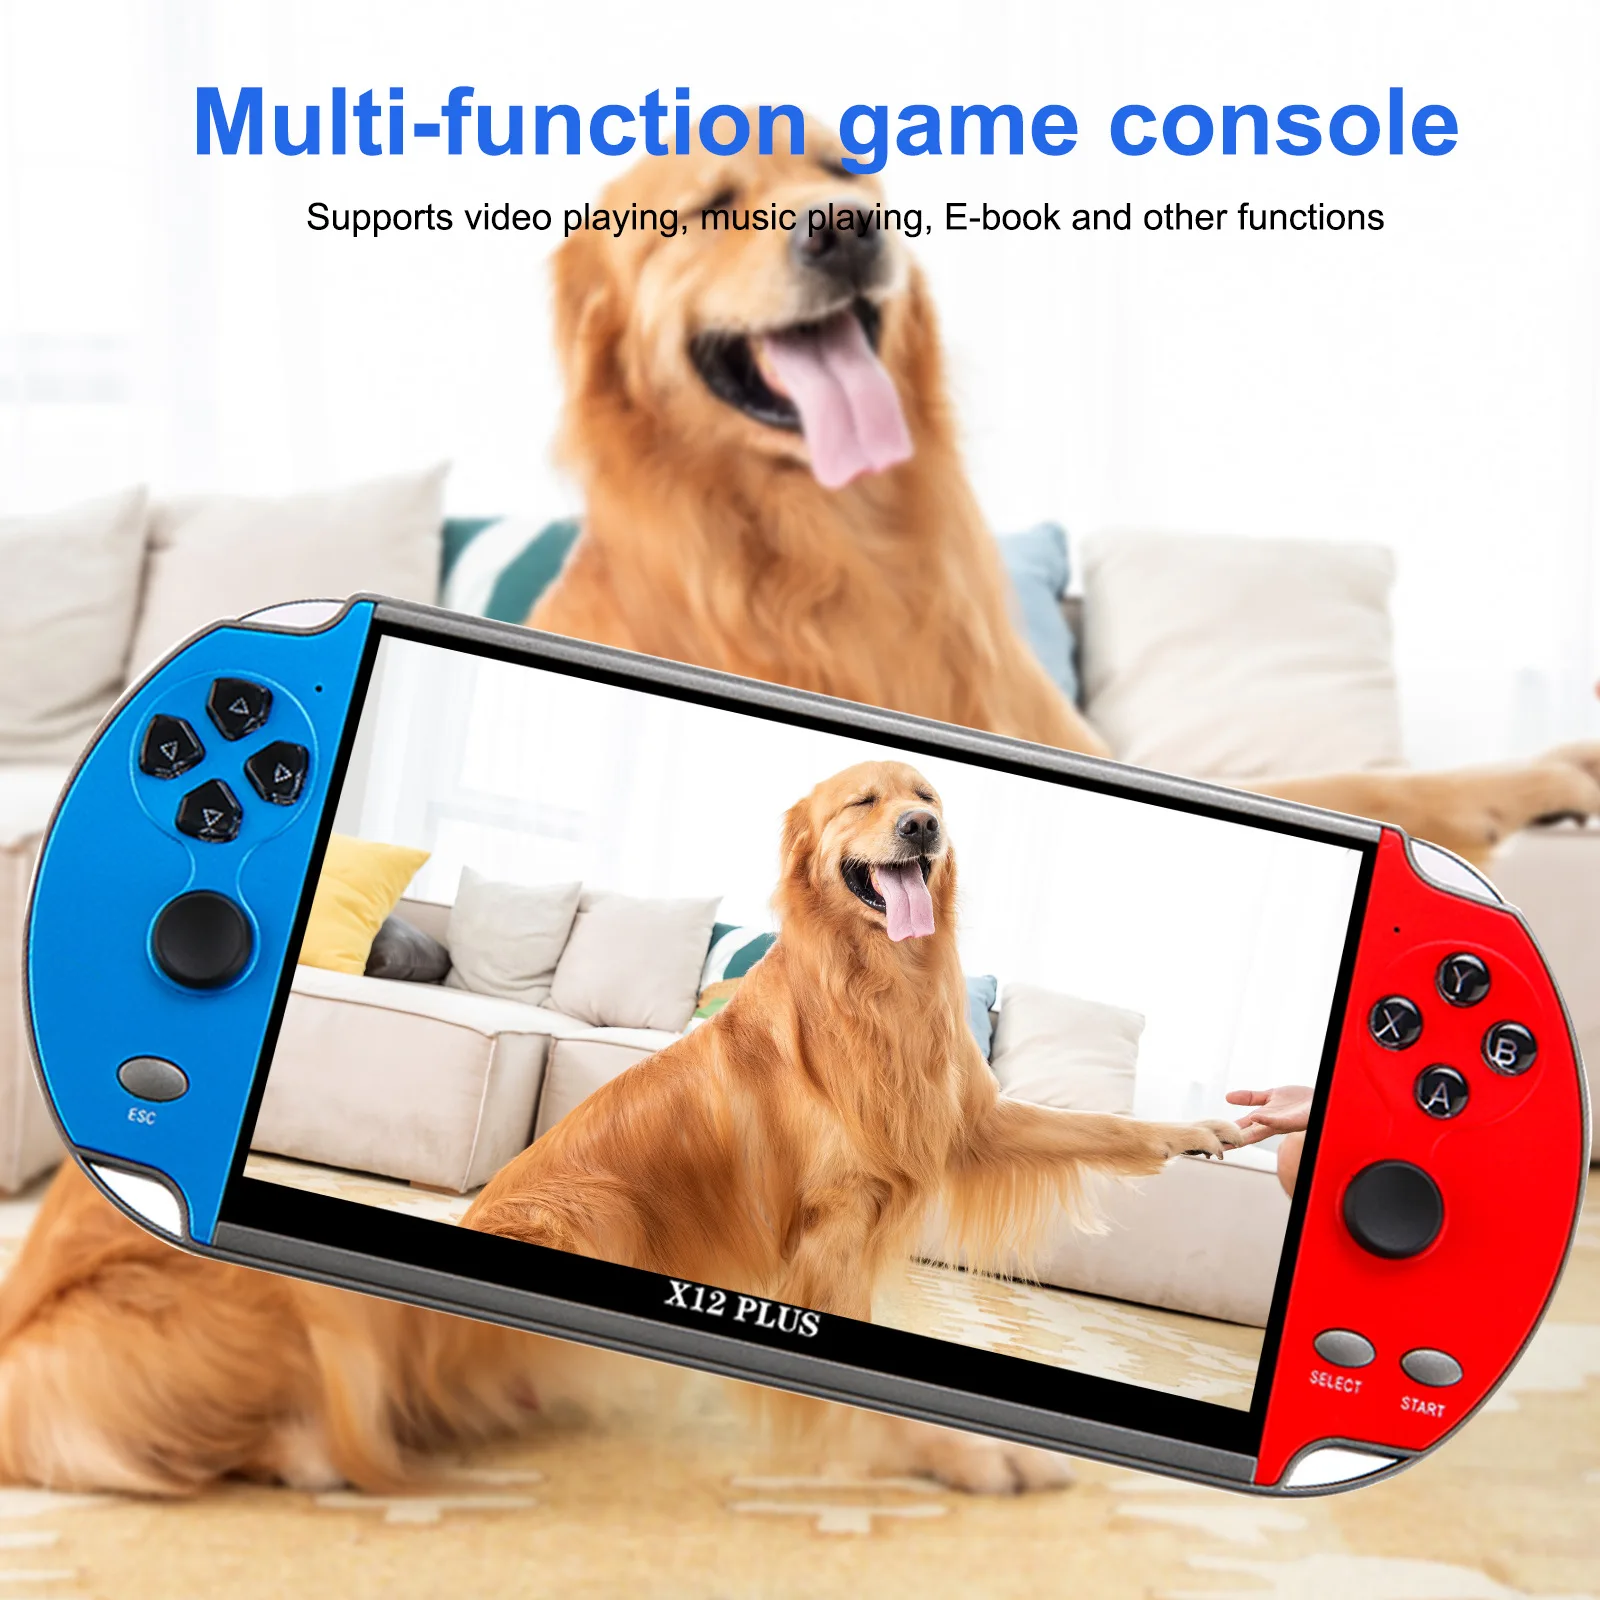 X12 PLUS 7.1 Inch HD Large Screen Dual Joystick Game Console Player Handheld Portable Arcade Video Games Electronic Gamepad